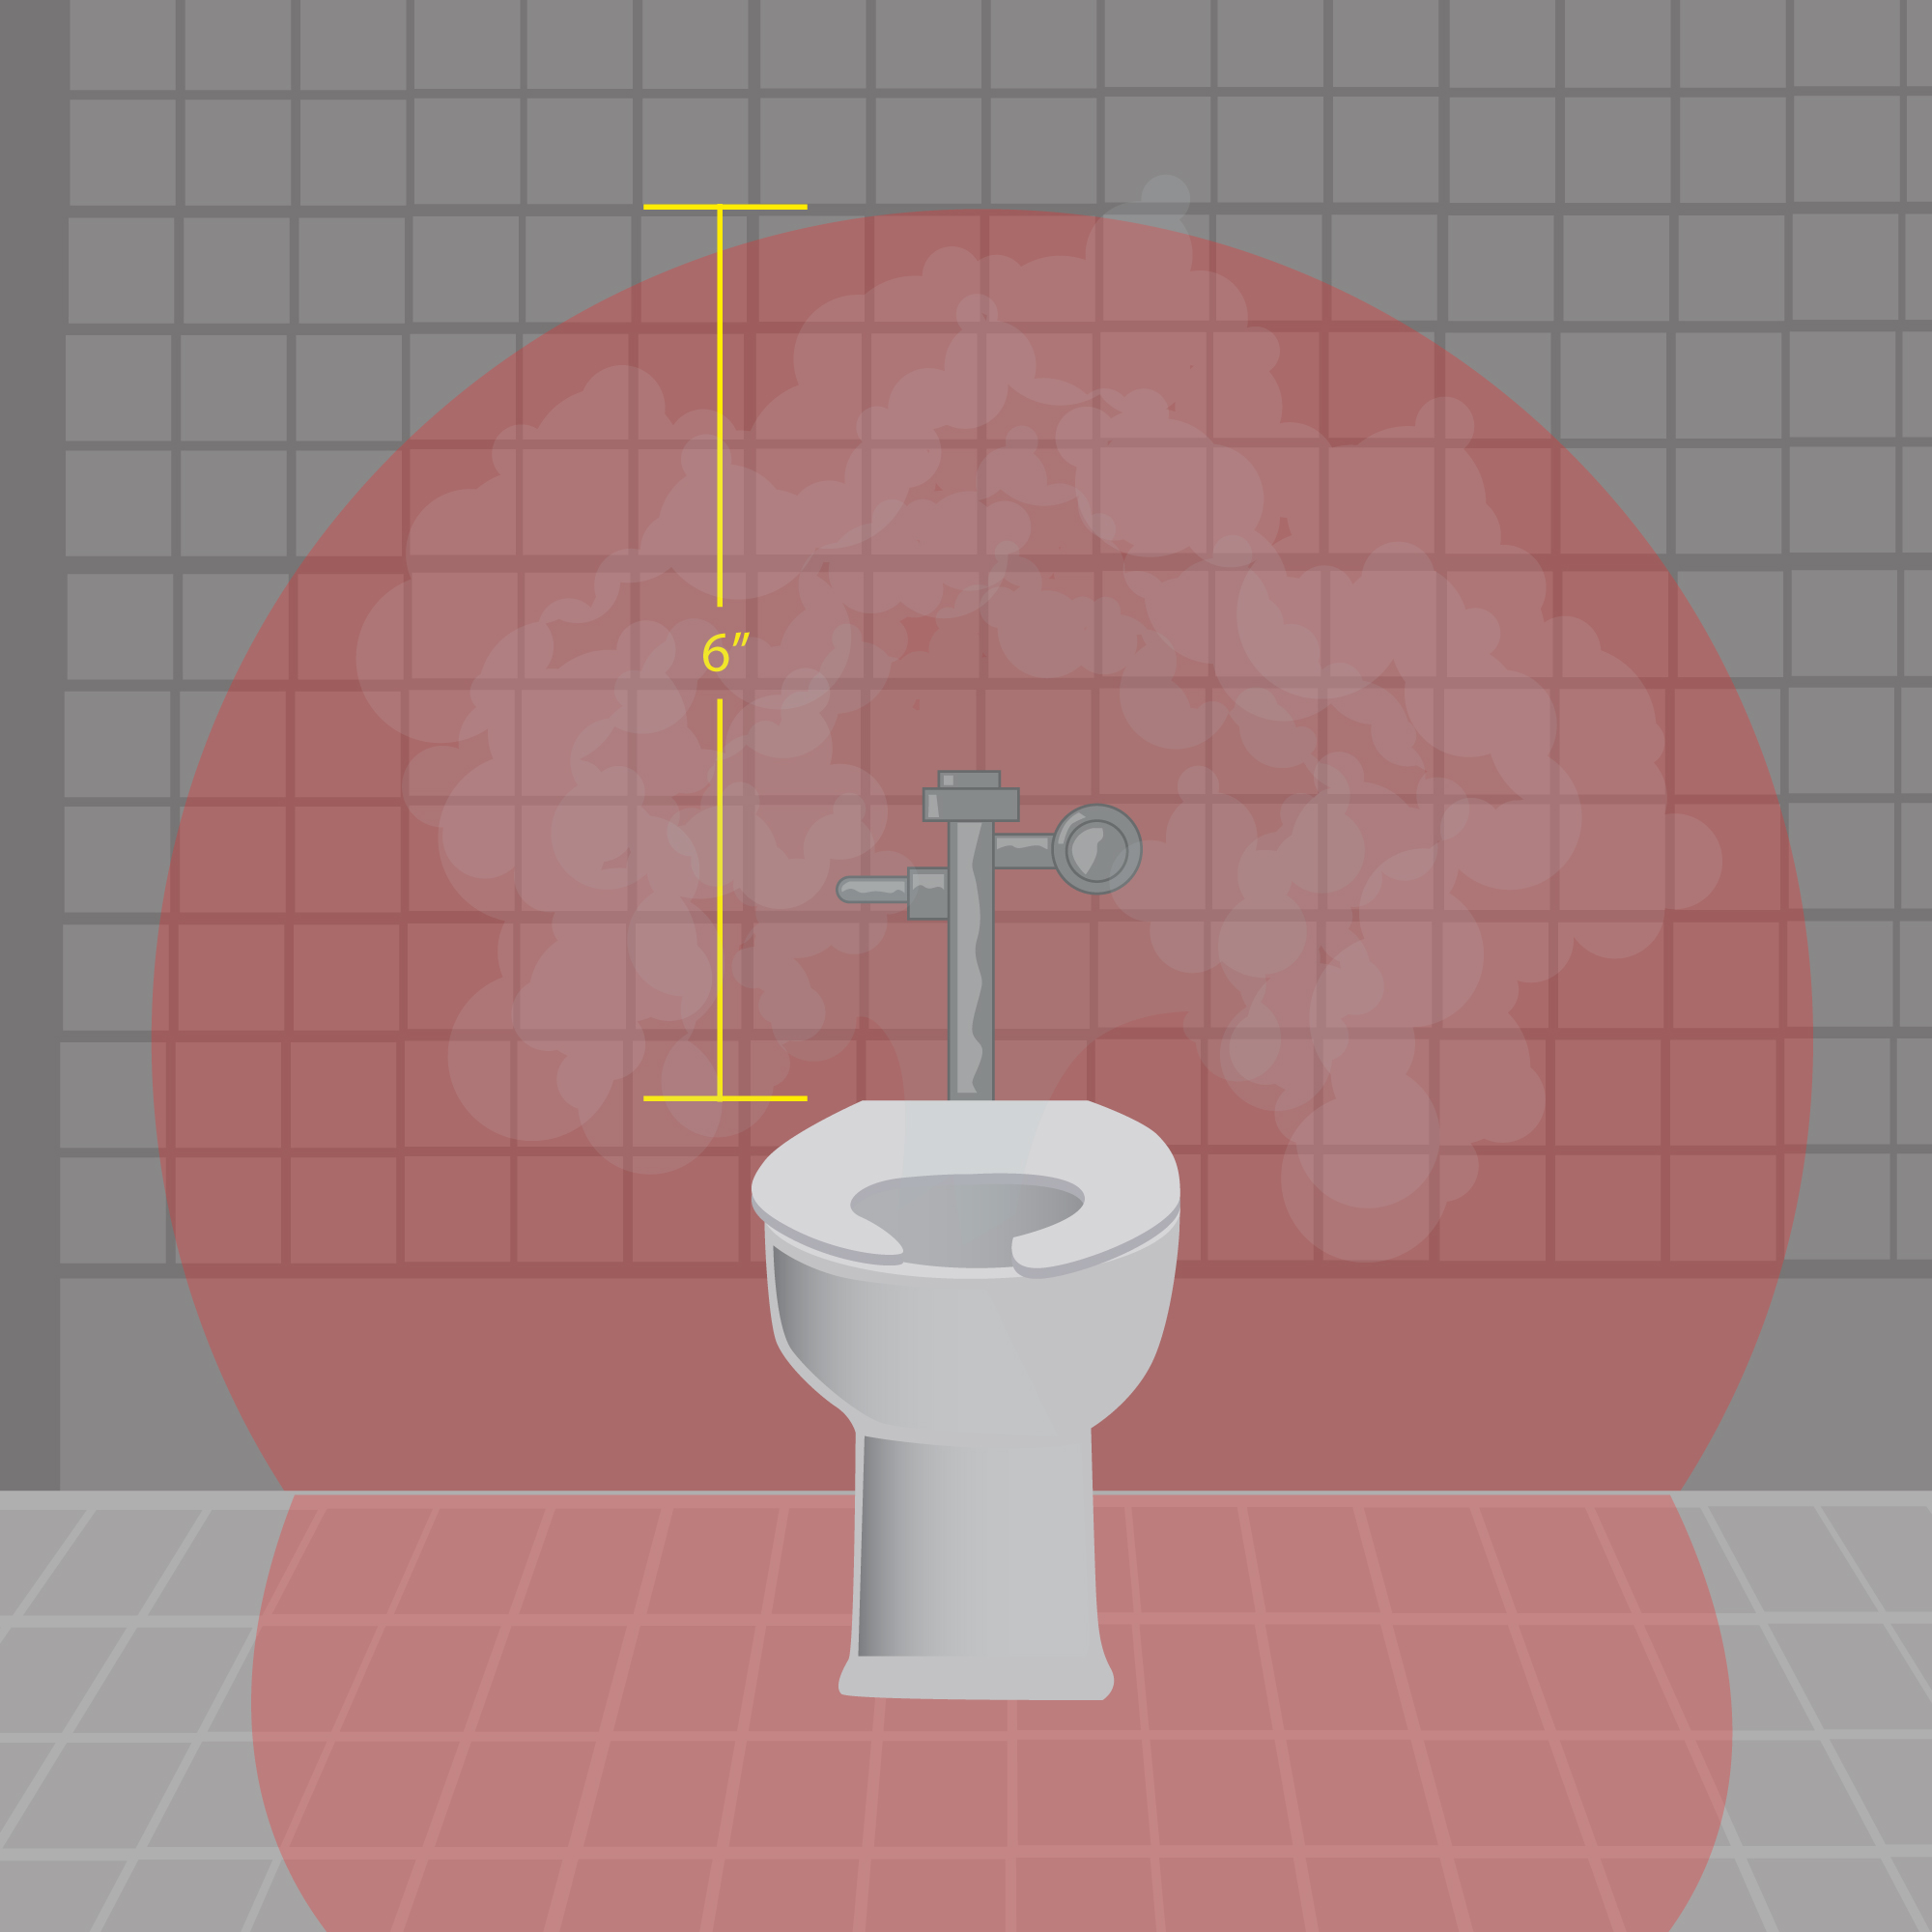 Toilet plume can reach up to six feet away